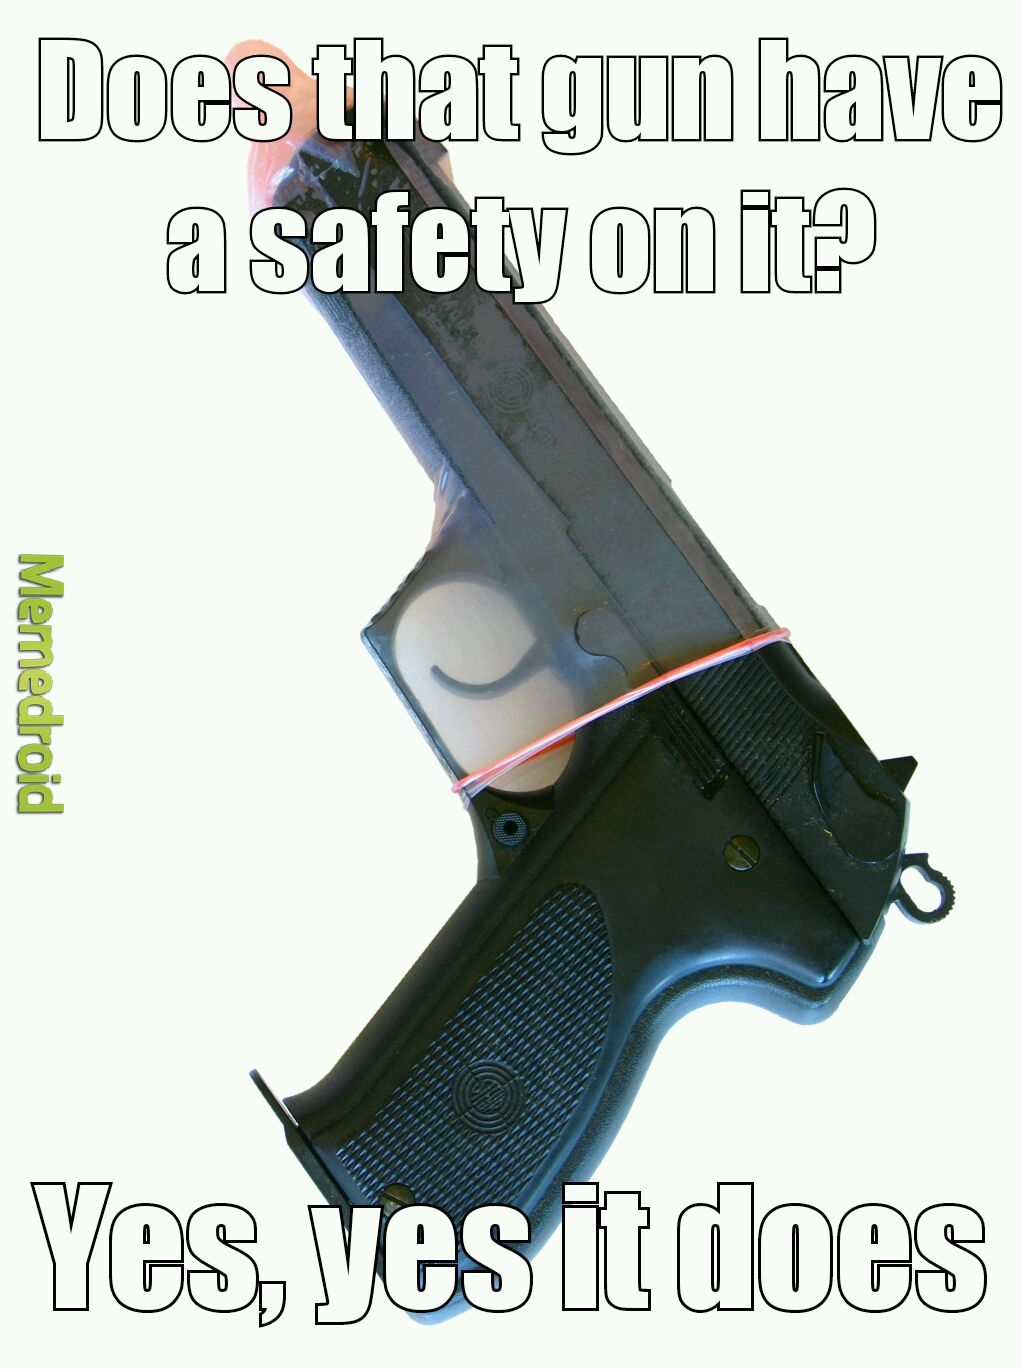 The only gun safety I need - meme